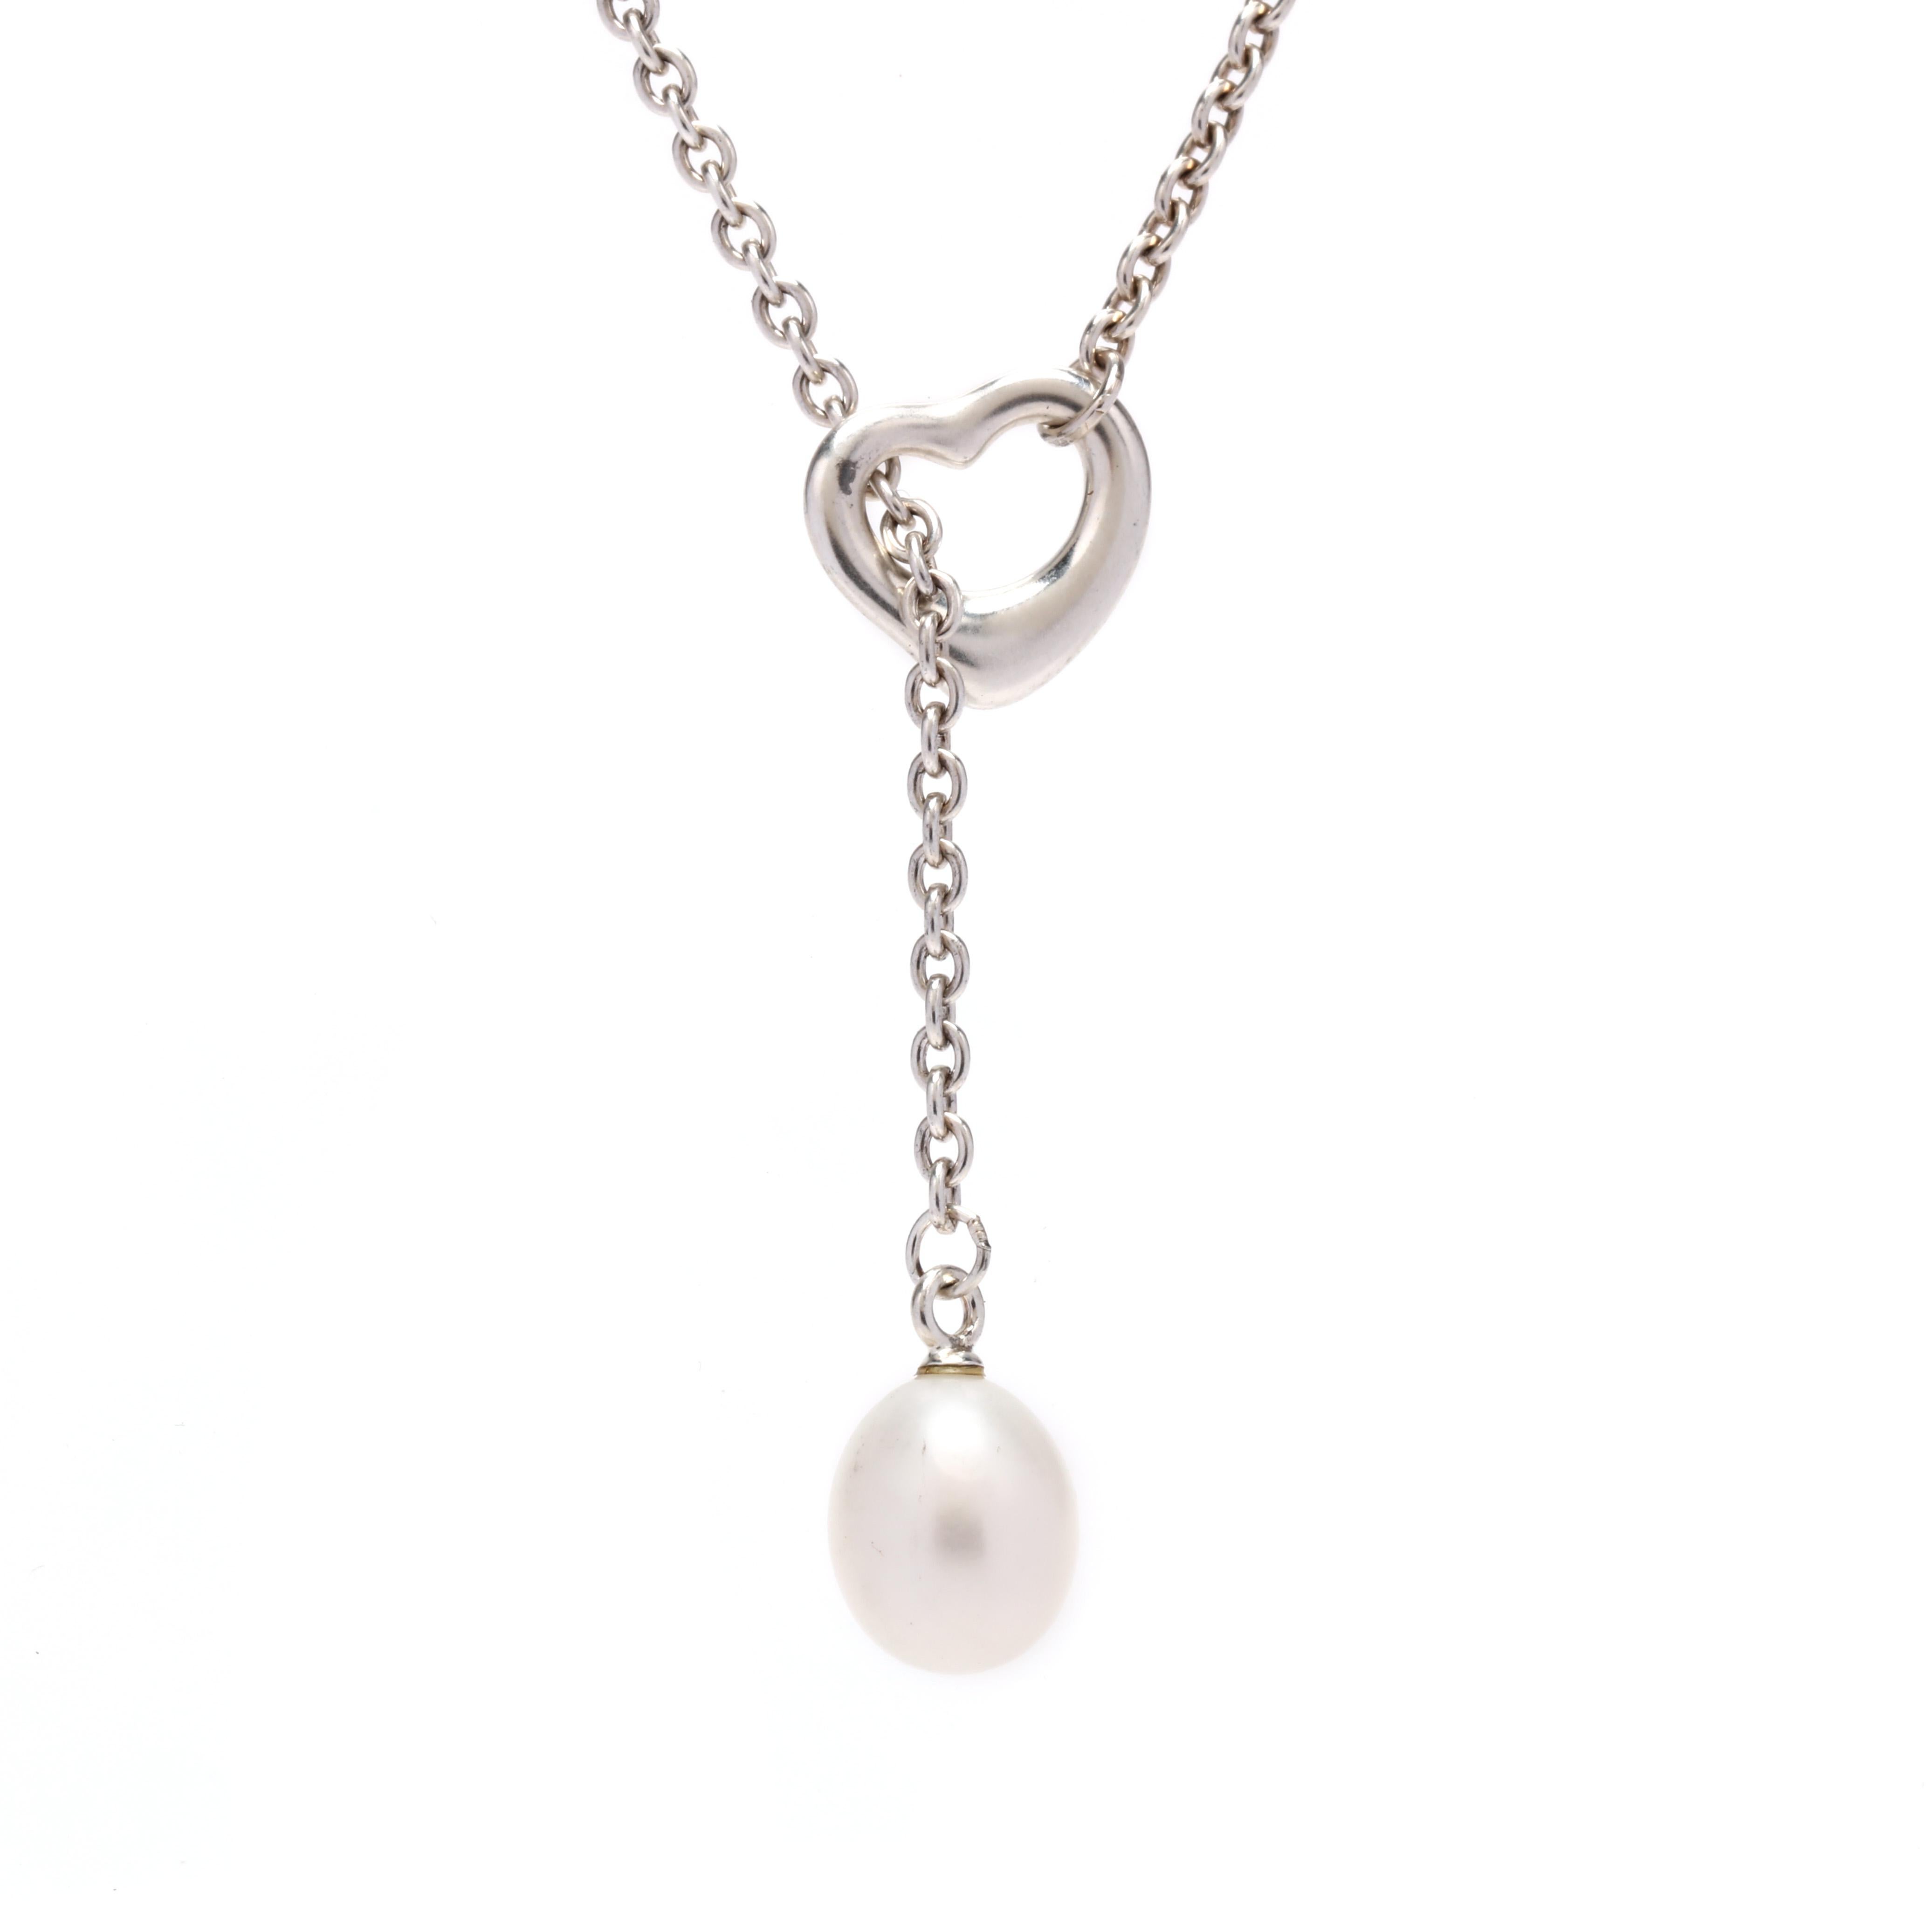 A sterling silver pearl heart lariat necklace by Tiffany and Company. This necklace features a cable chain with an open heart at one end with the other pearl end going through it to create a lariat and with a spring ring clasp.



Stone:

- pearl, 1